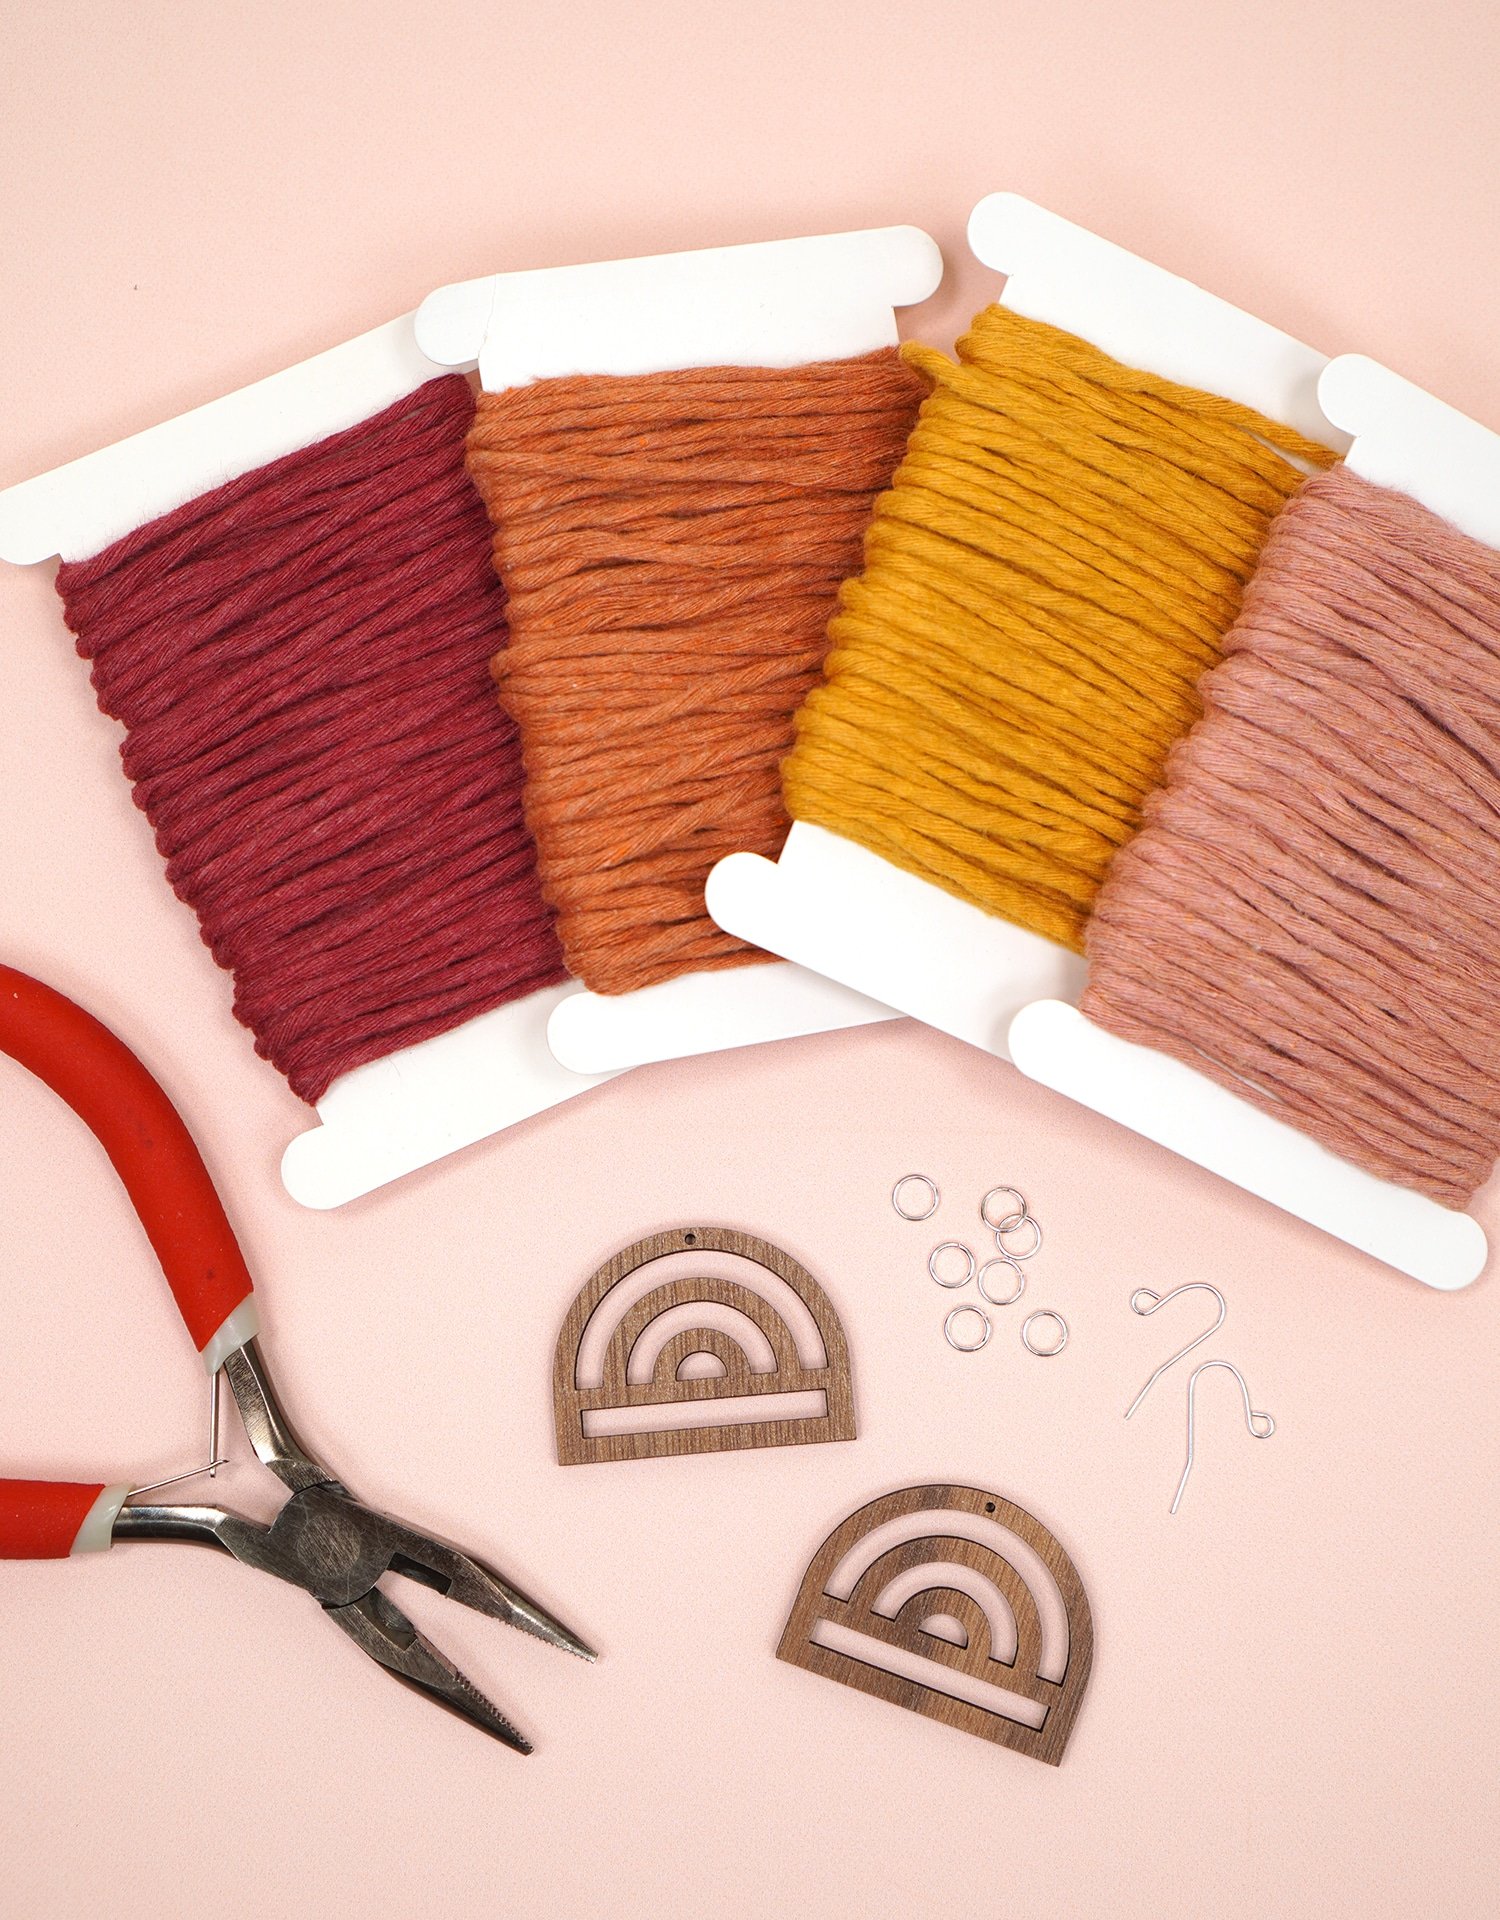 Supplies to Make Macrame Rainbow Earrings on peach background - cord, wooden rainbows, earring findings, and jewelry pliers